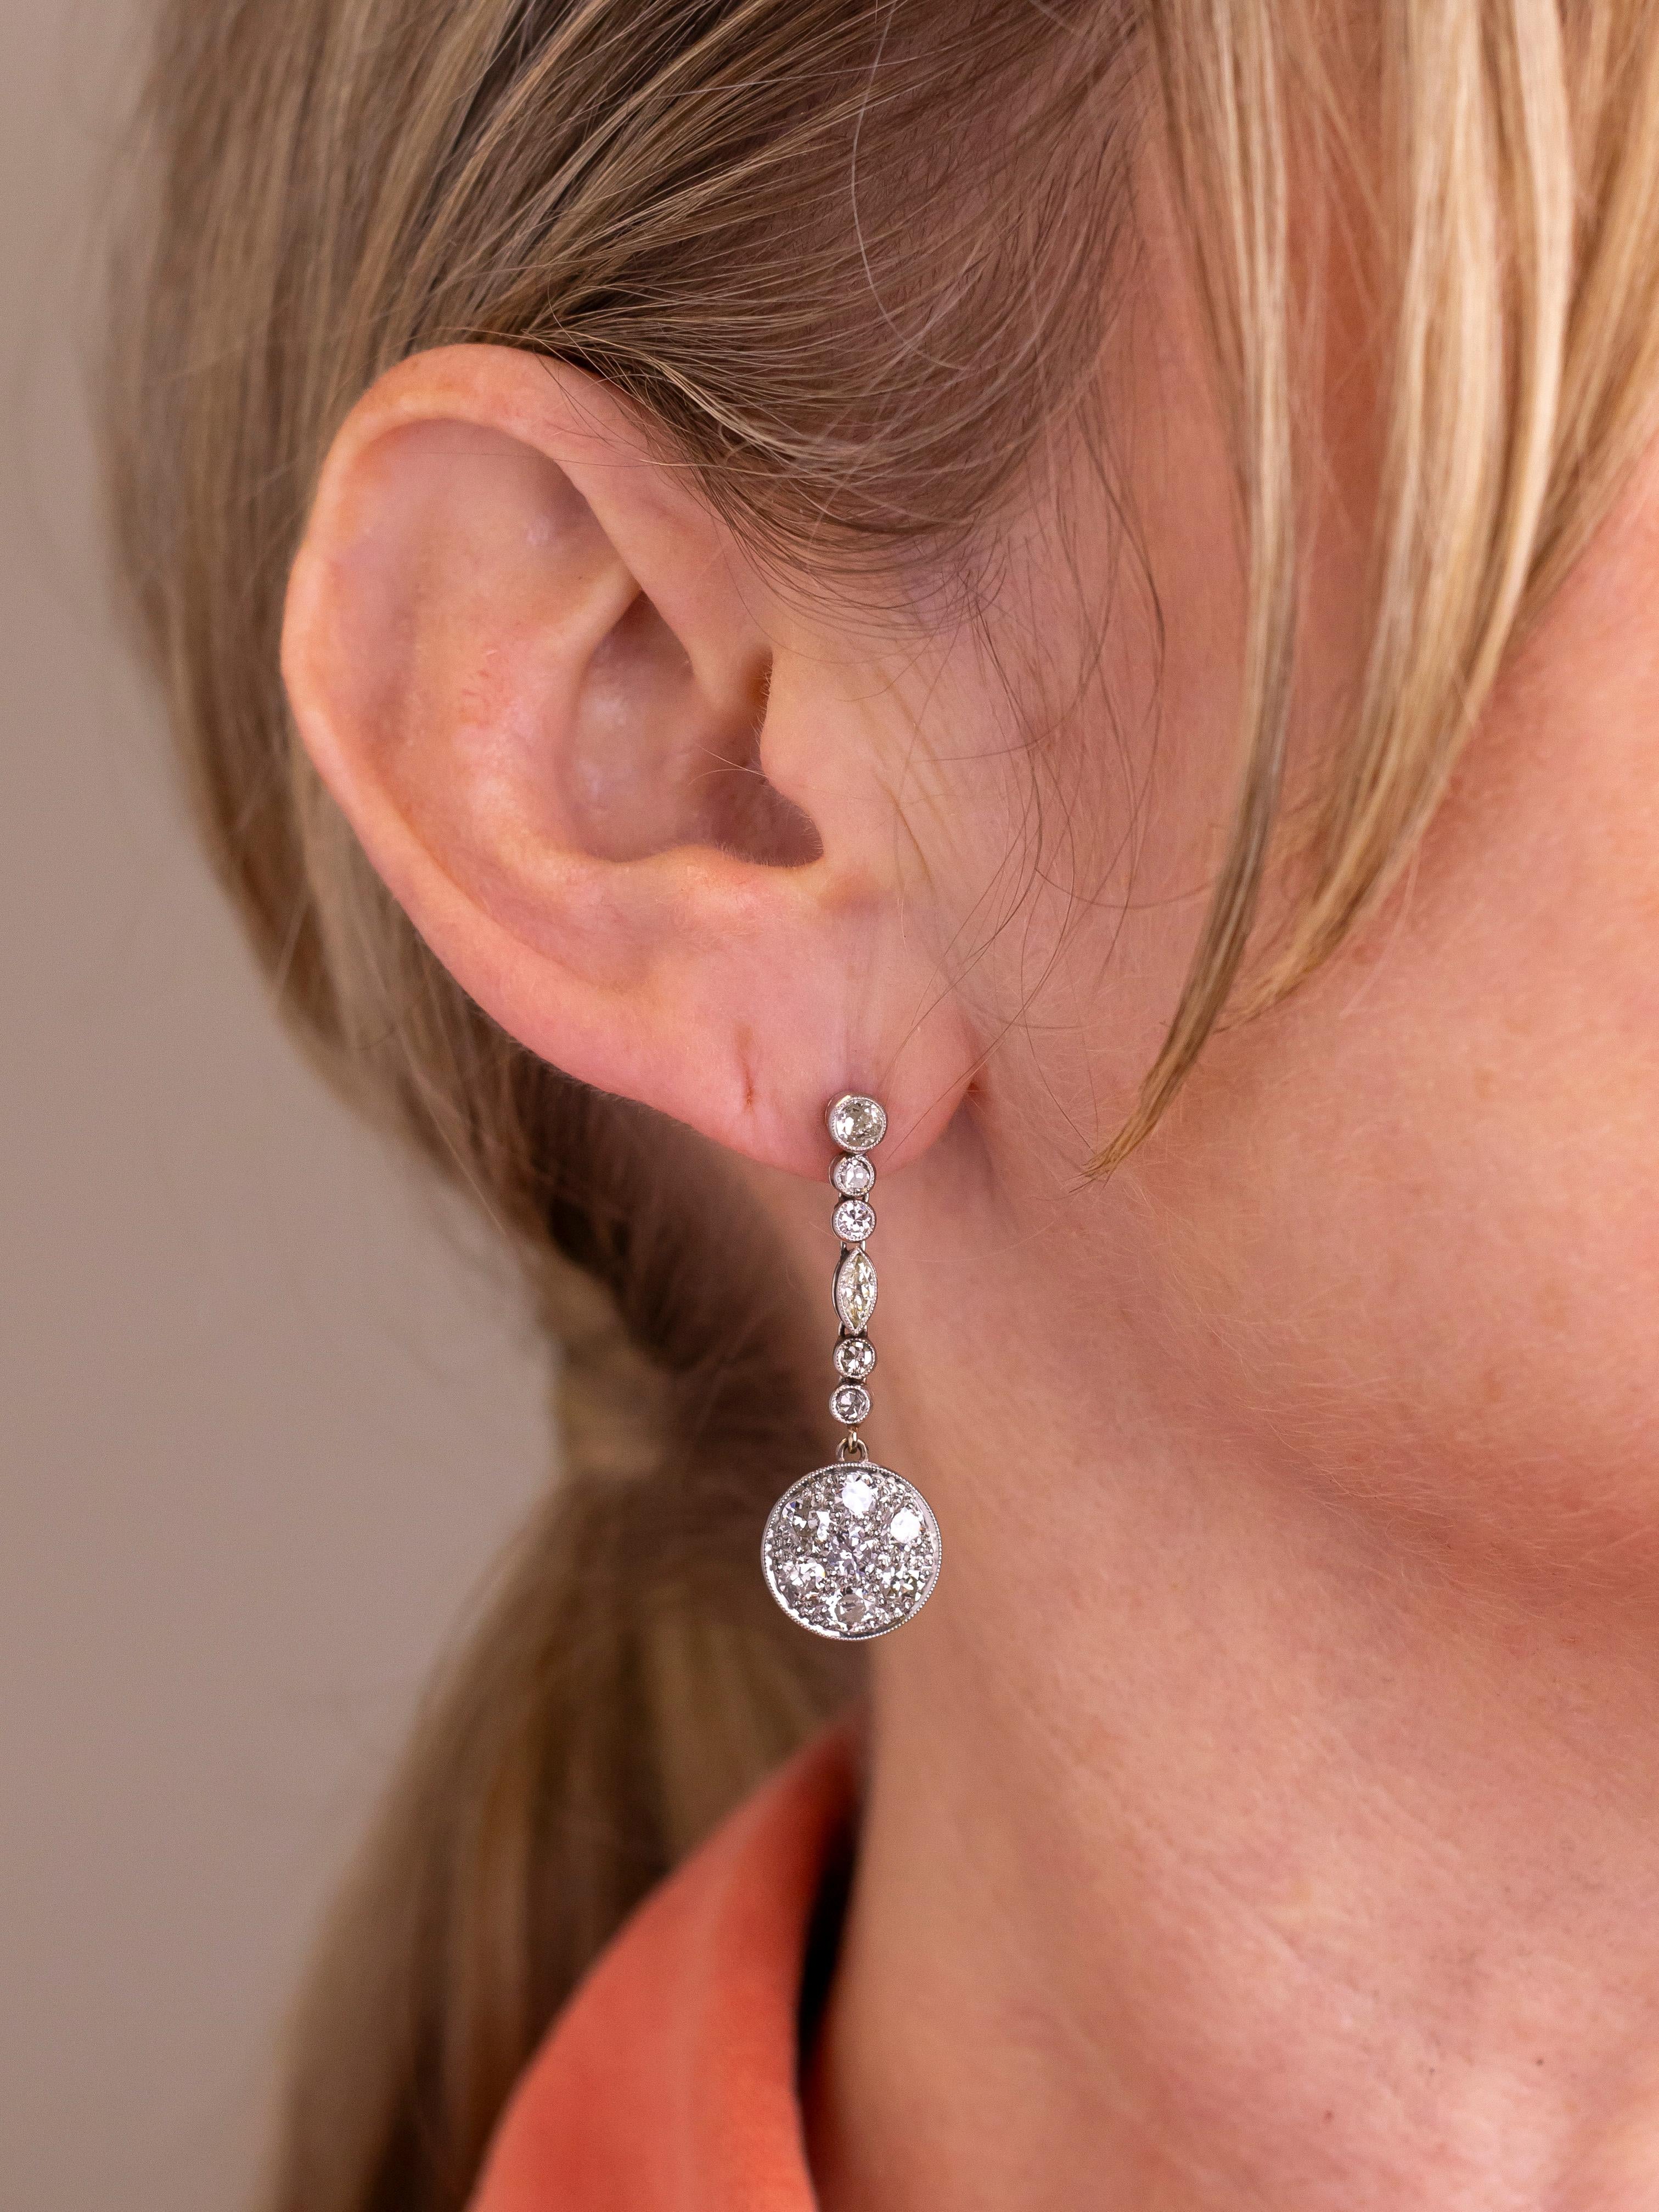 This rather delightful pair of platinum and diamond earrings date to the Art Deco period and have been made by hand. The stud type earrings have a platinum thread and screw back, meaning when they are on the ear they are extremely secure. The top of